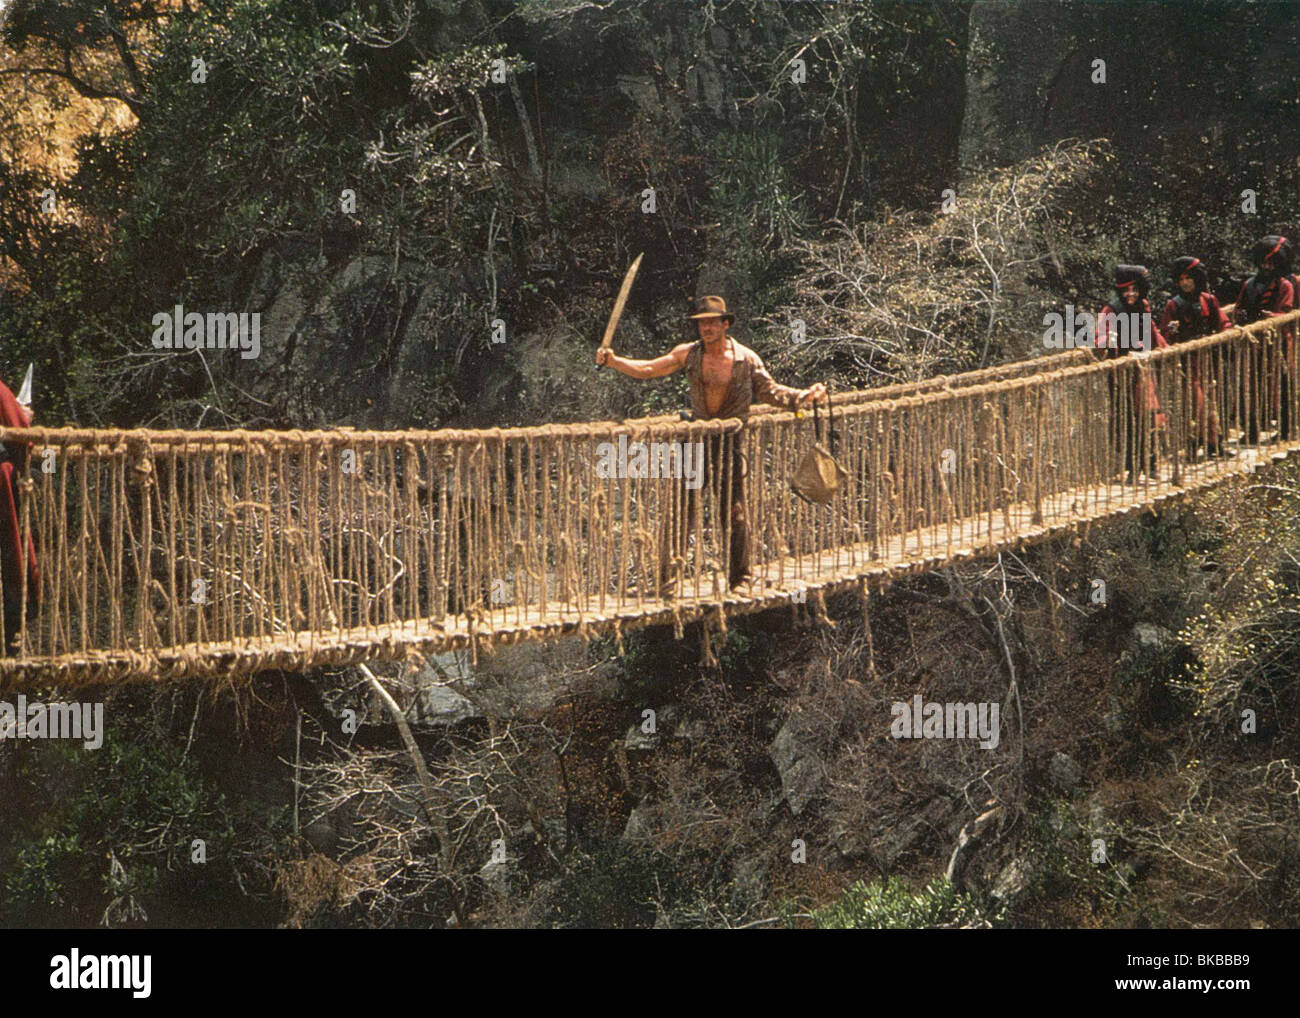 INDIANA JONES AND THE TEMPLE OF DOOM (1984) HARRISON FORD INT 003FOH Stock Photo